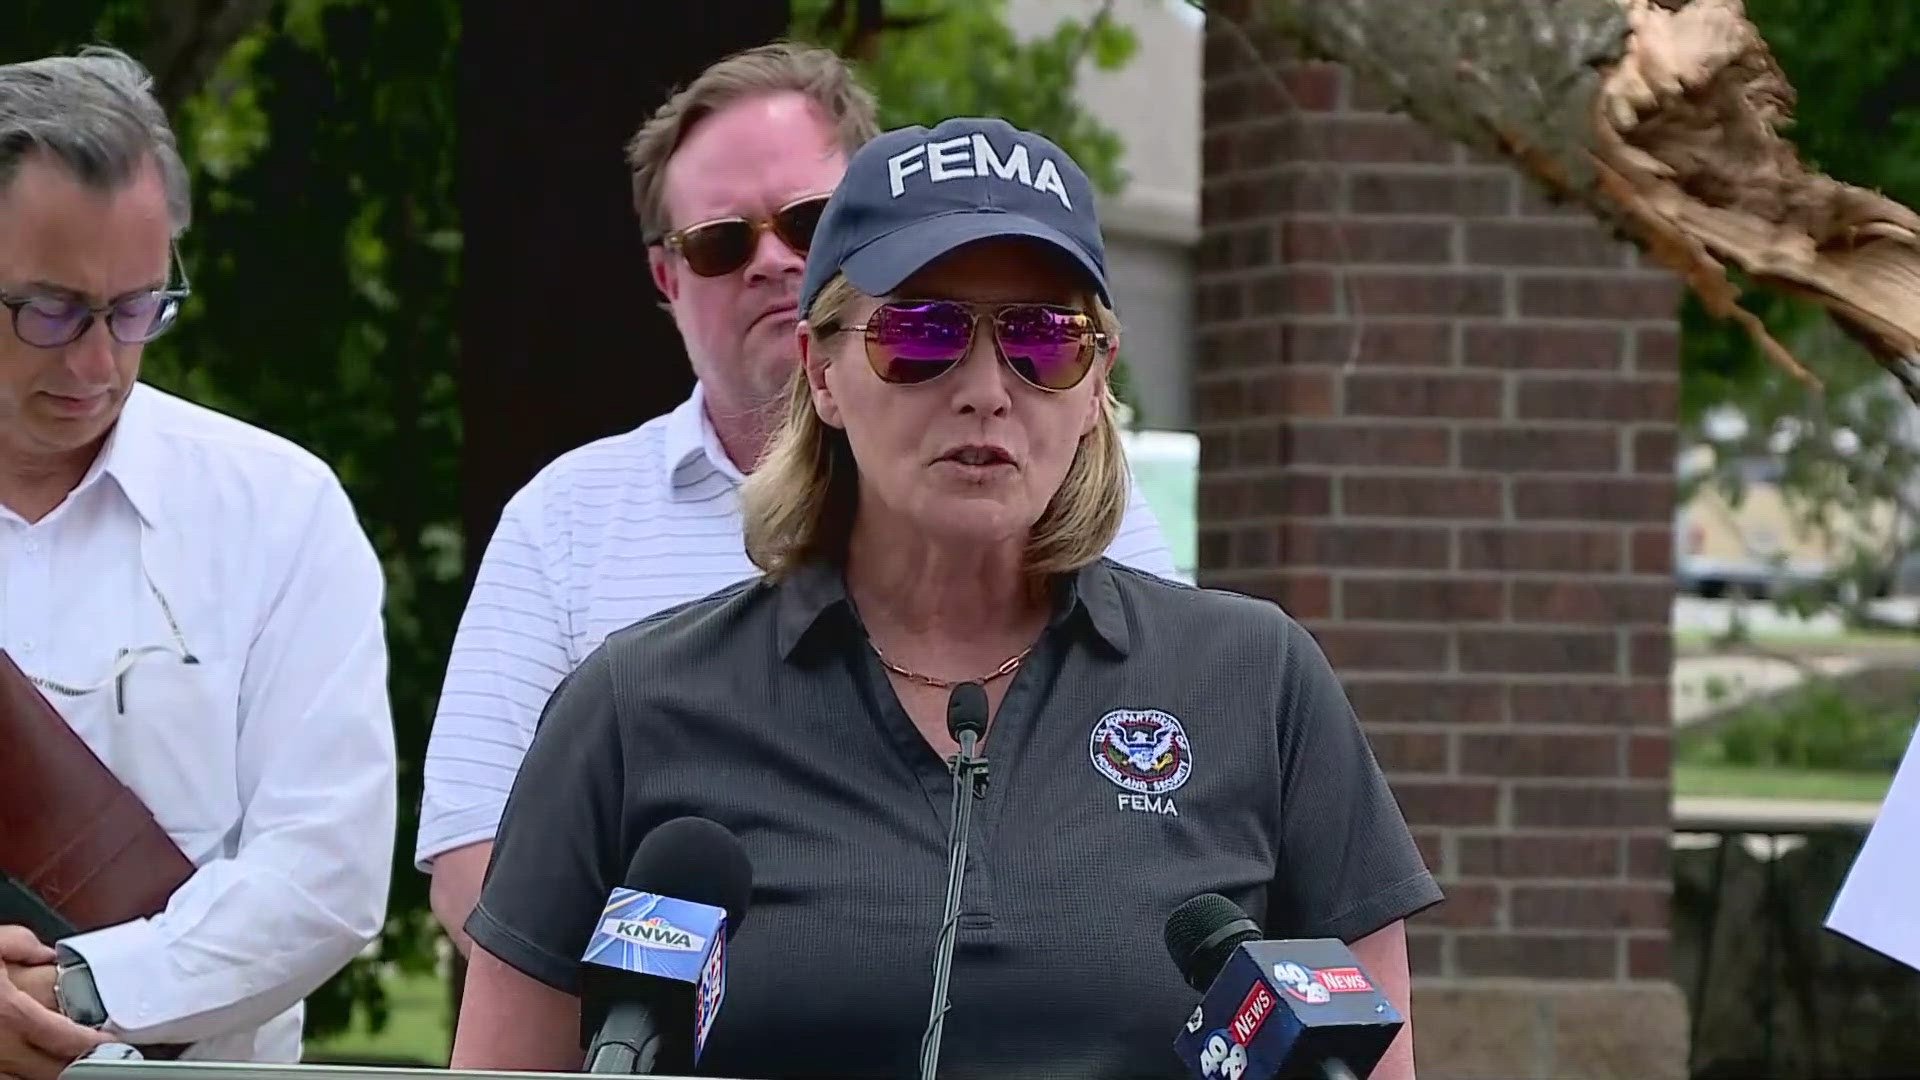 Arkansas Department of Emergency Management Director A.J. Gary confirmed the state will request a federal disaster declaration in order to attain federal assistance.